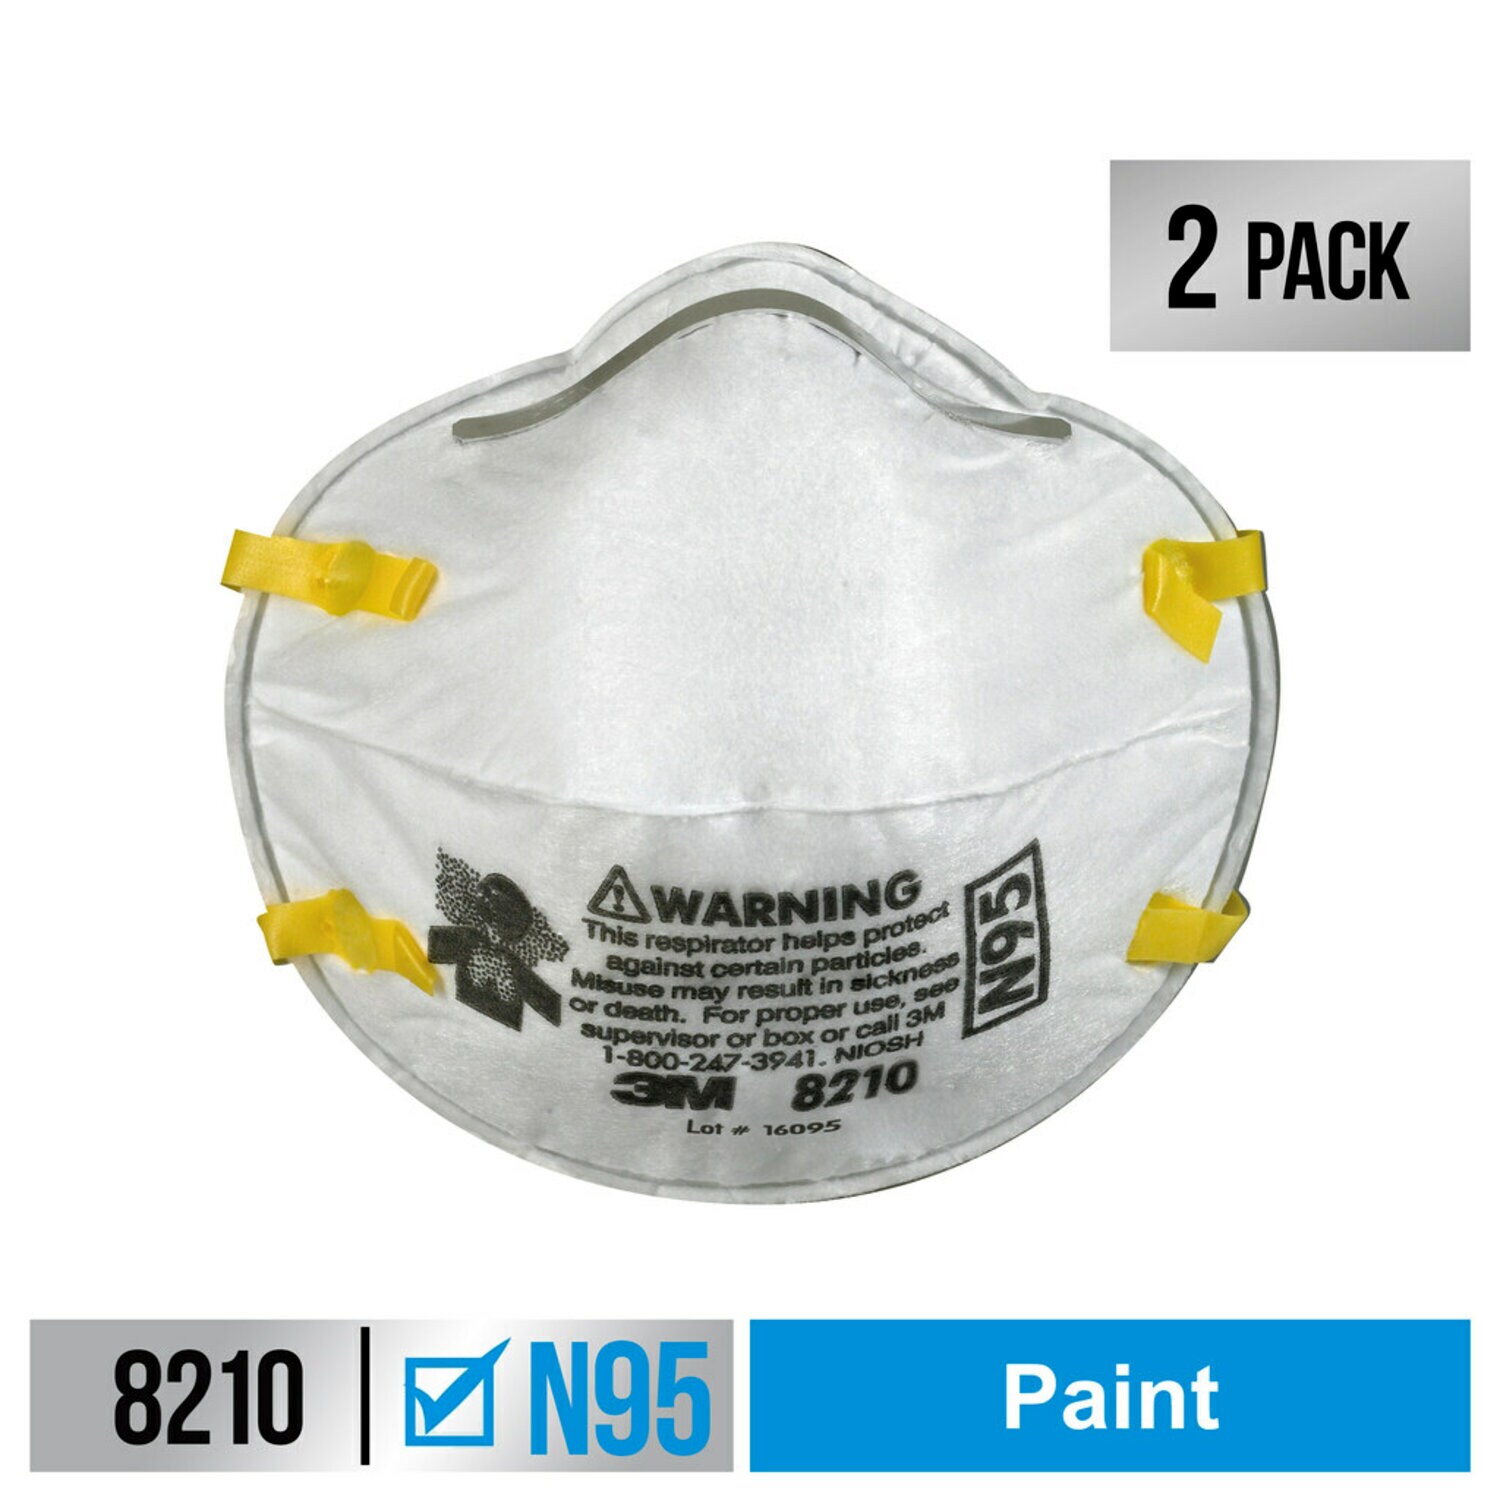 7100158826 - 3M Performance Paint Prep Respirator N95 Particulate, 8210P2-DC, 2
eaches/pack, 12 packs/case